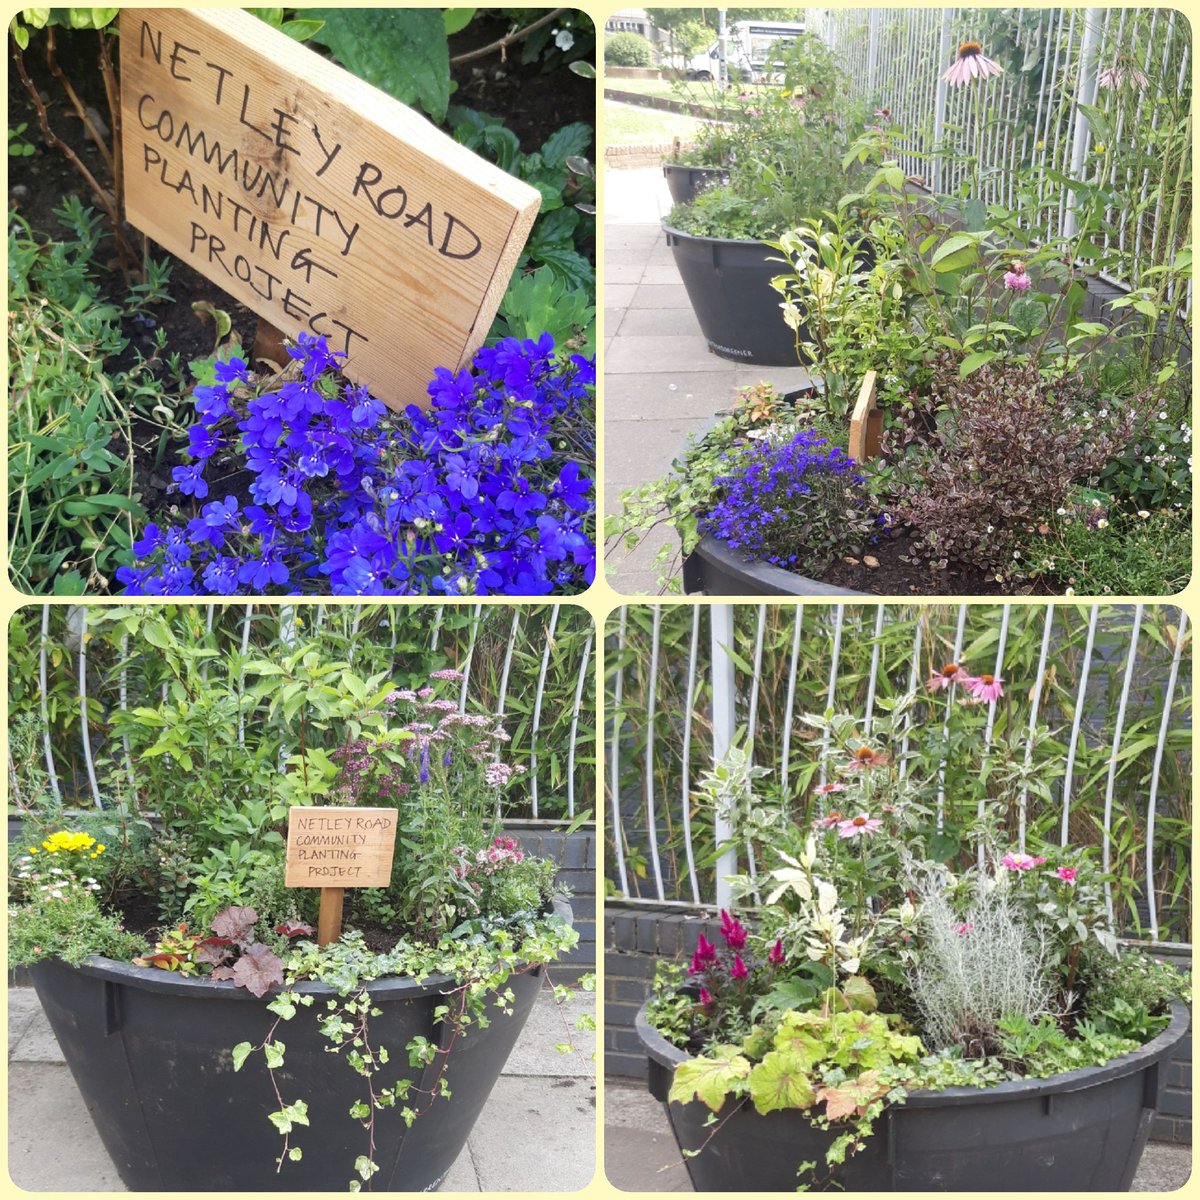 Loving the enormous pots of plants on Netley Road.. well done if you were part of making them happen. They look great! 🌼🏵🌼

#community #communityplanting #Brentford #flowers #plants #cleanerair